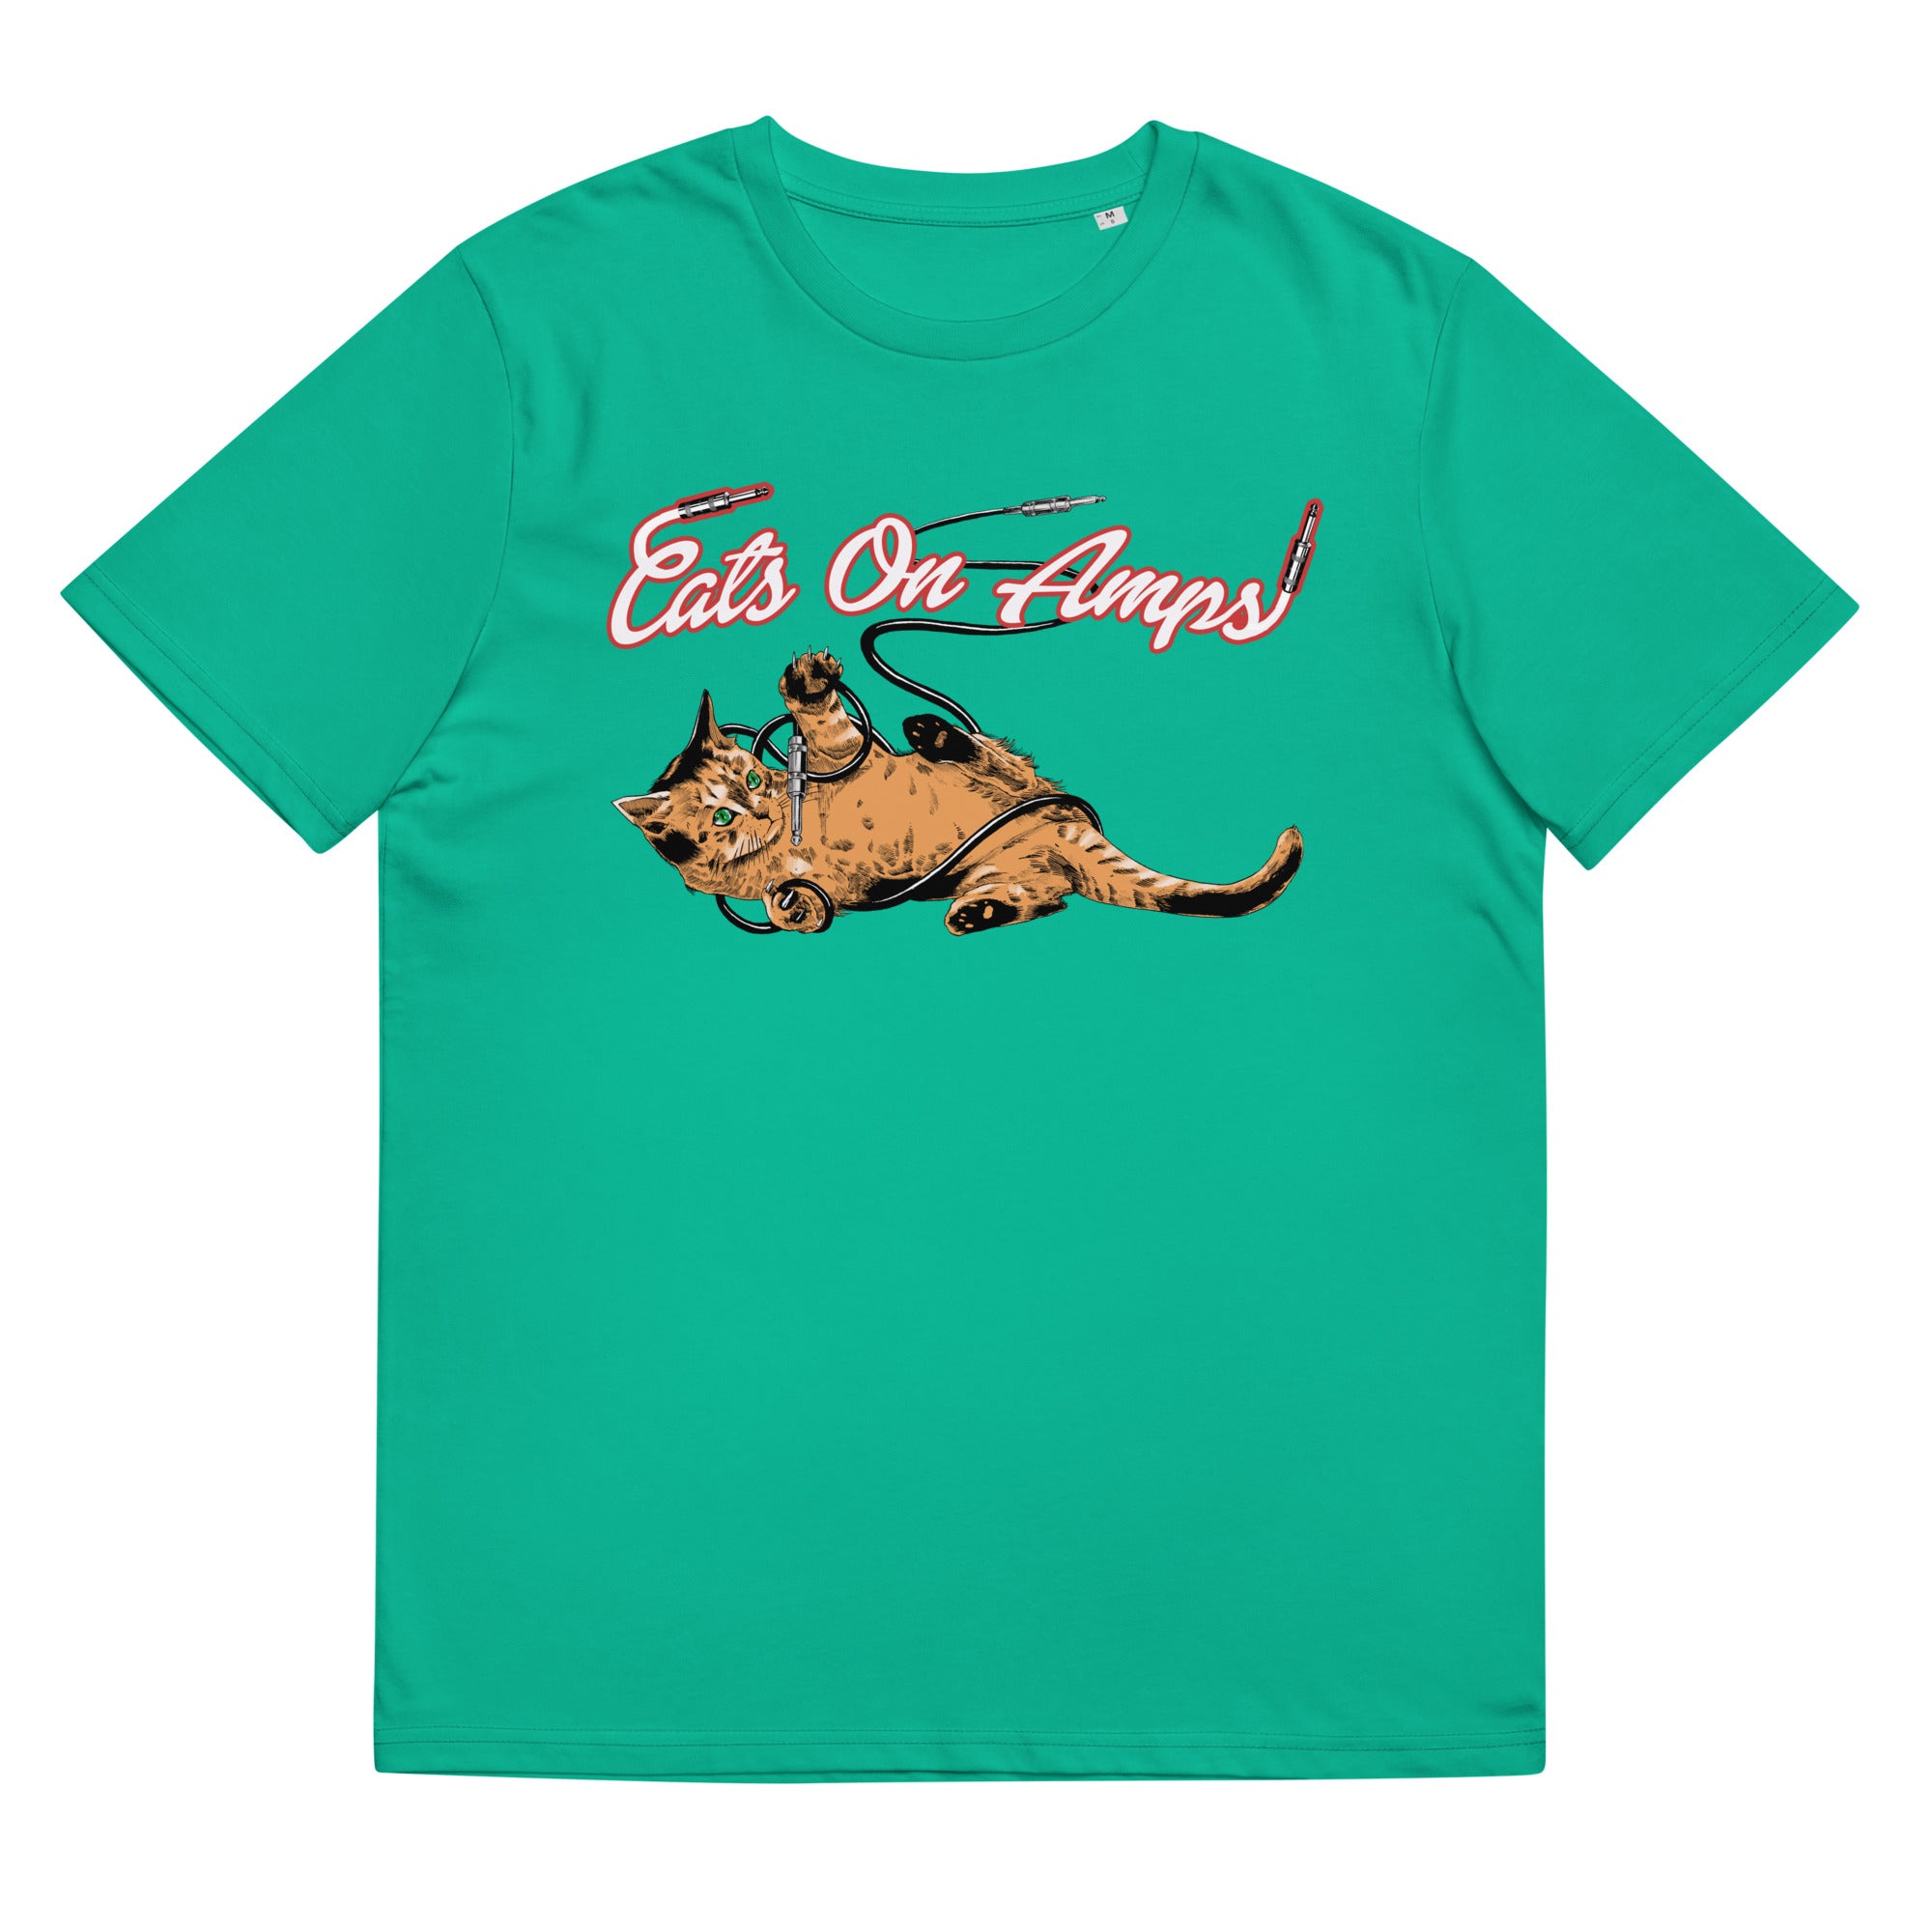 CATS ON AMPS - Tangled Cat - Unisex Organic Cotton T-Shirt